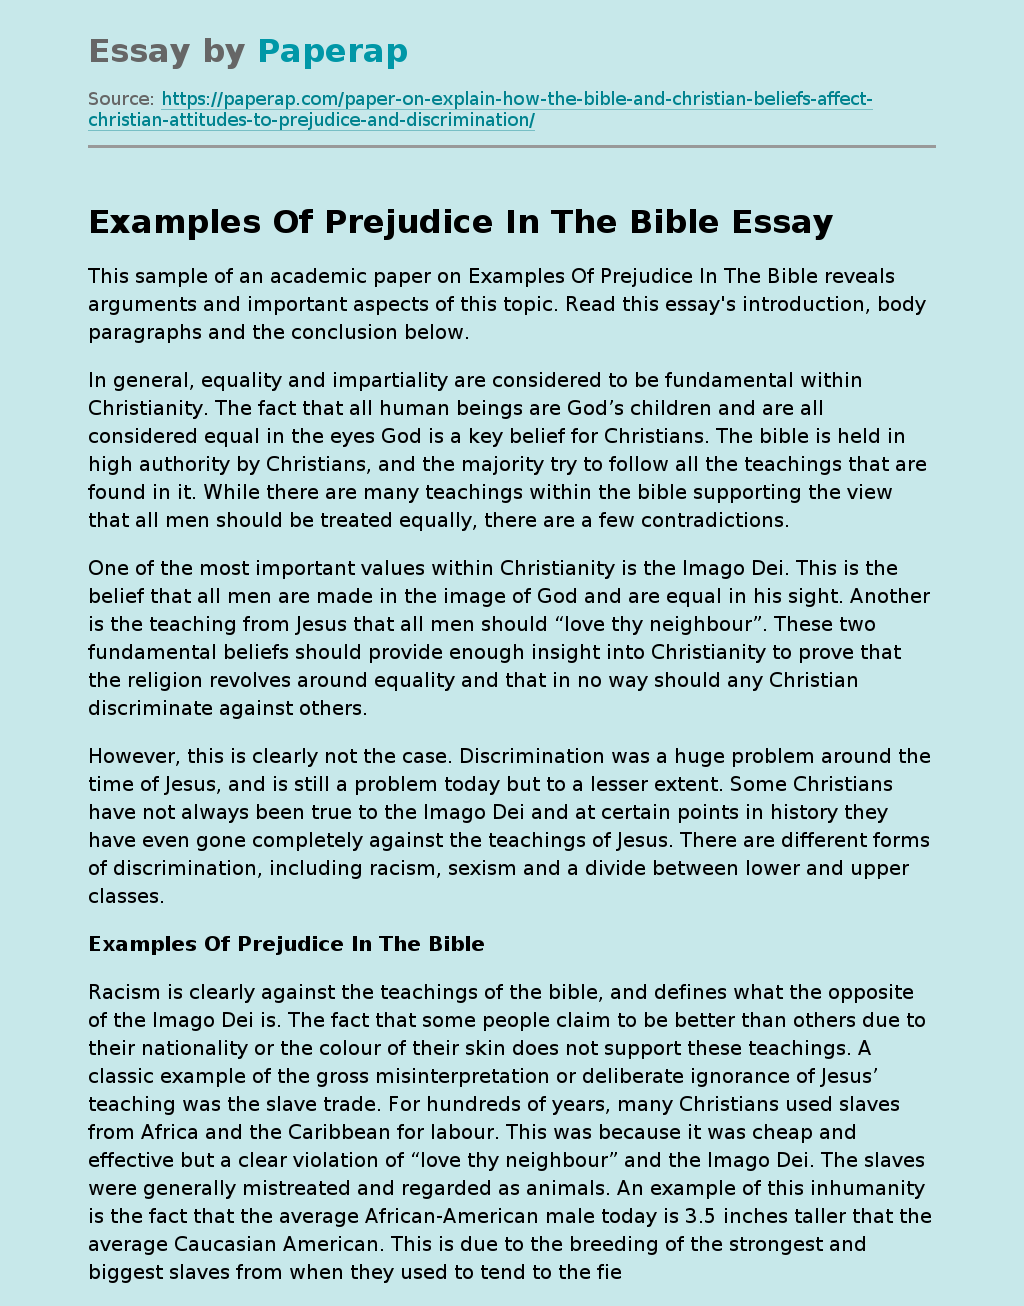 Examples Of Prejudice In The Bible